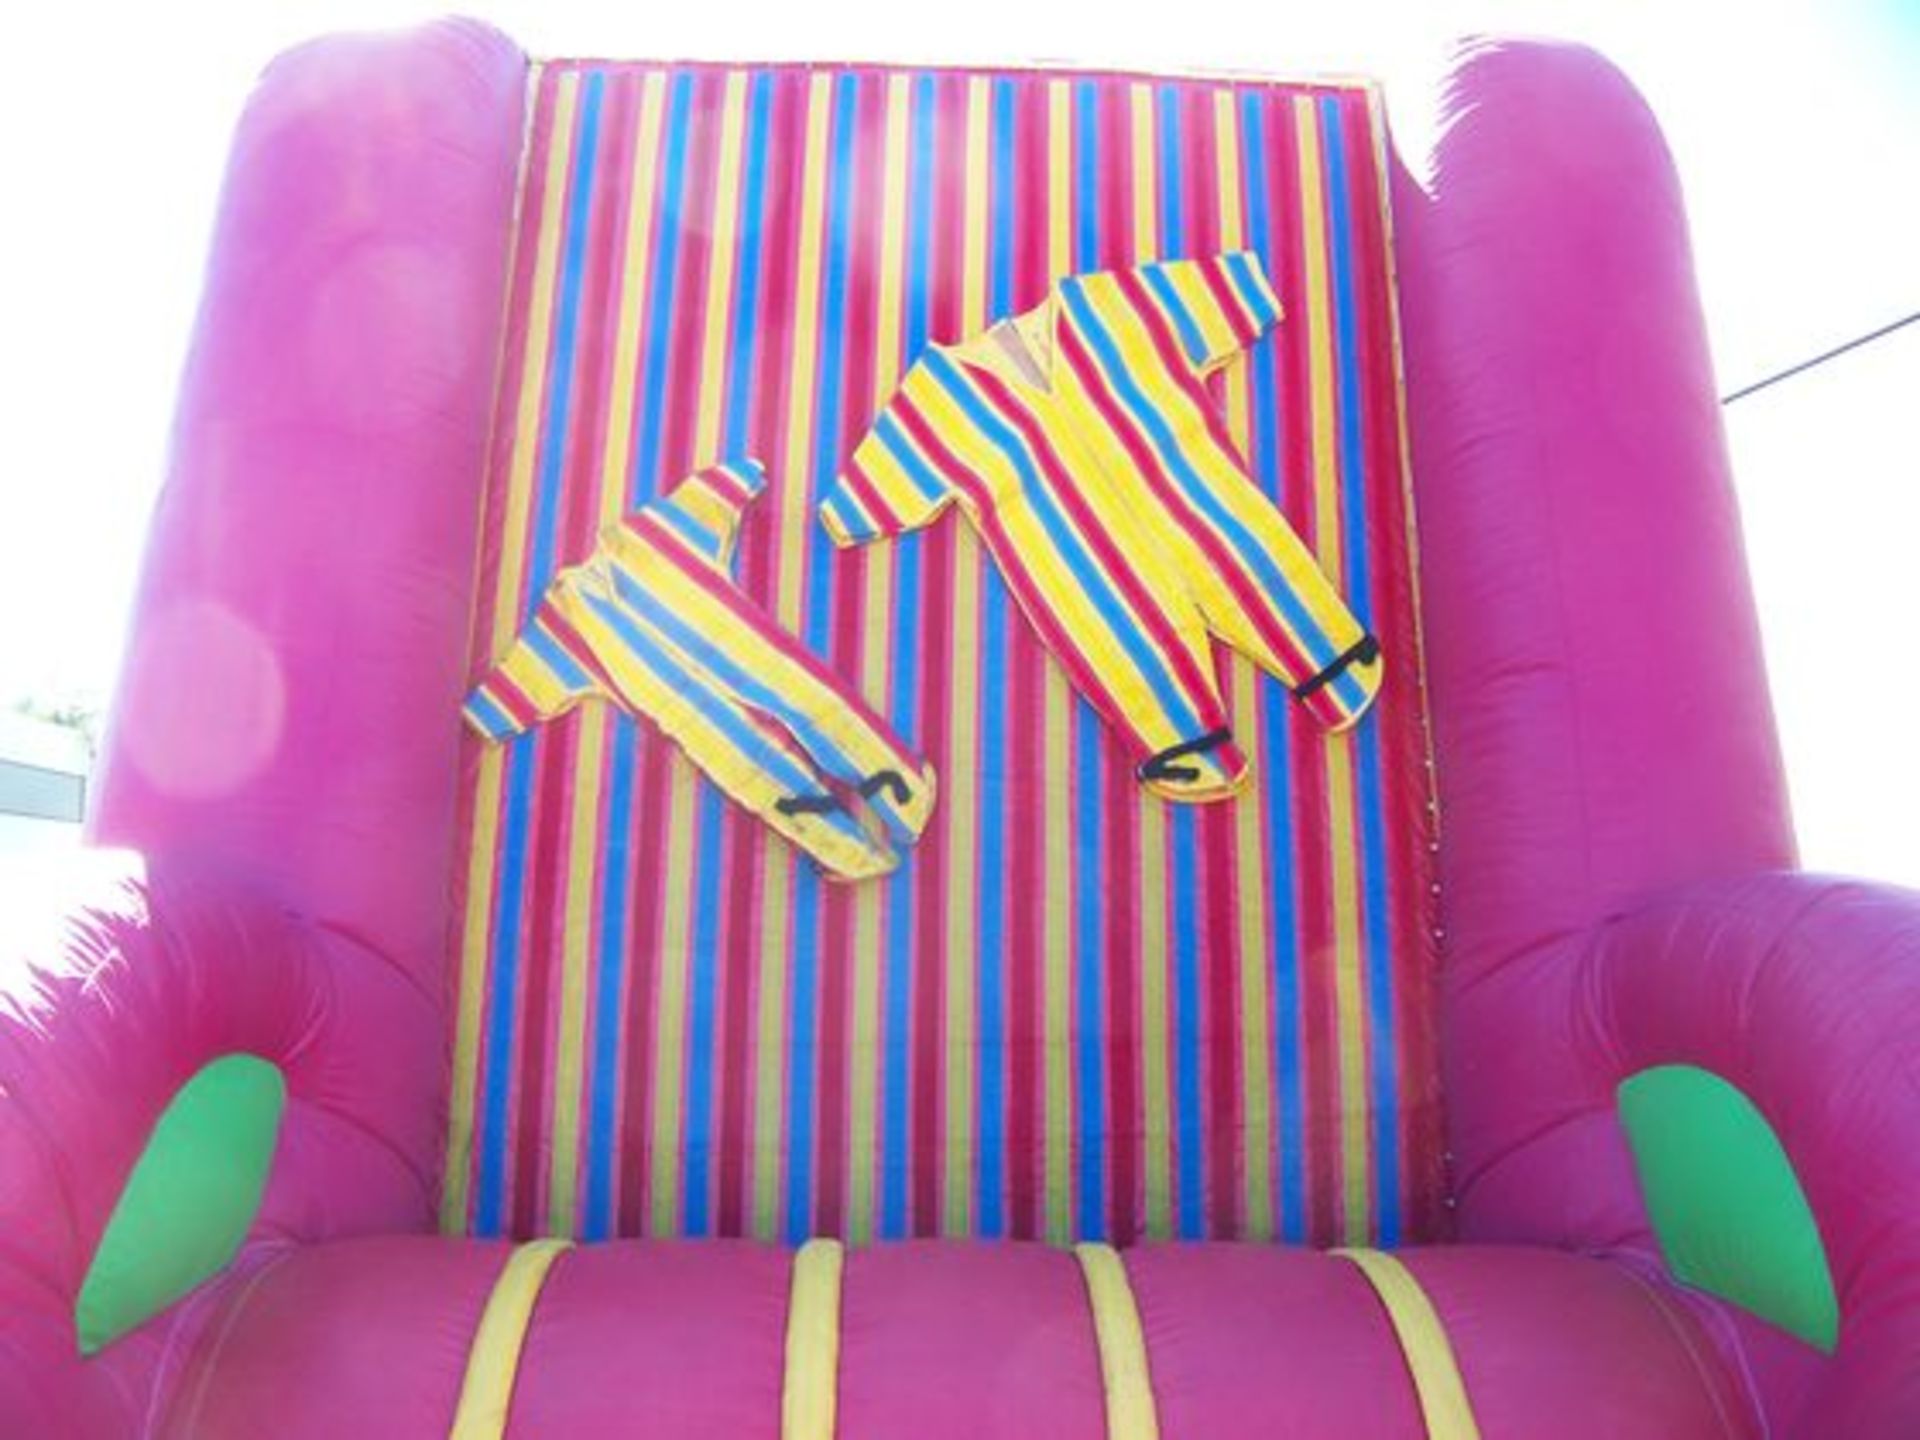 VELCRO WALL BOUNCER FULL SIZE - Image 4 of 7